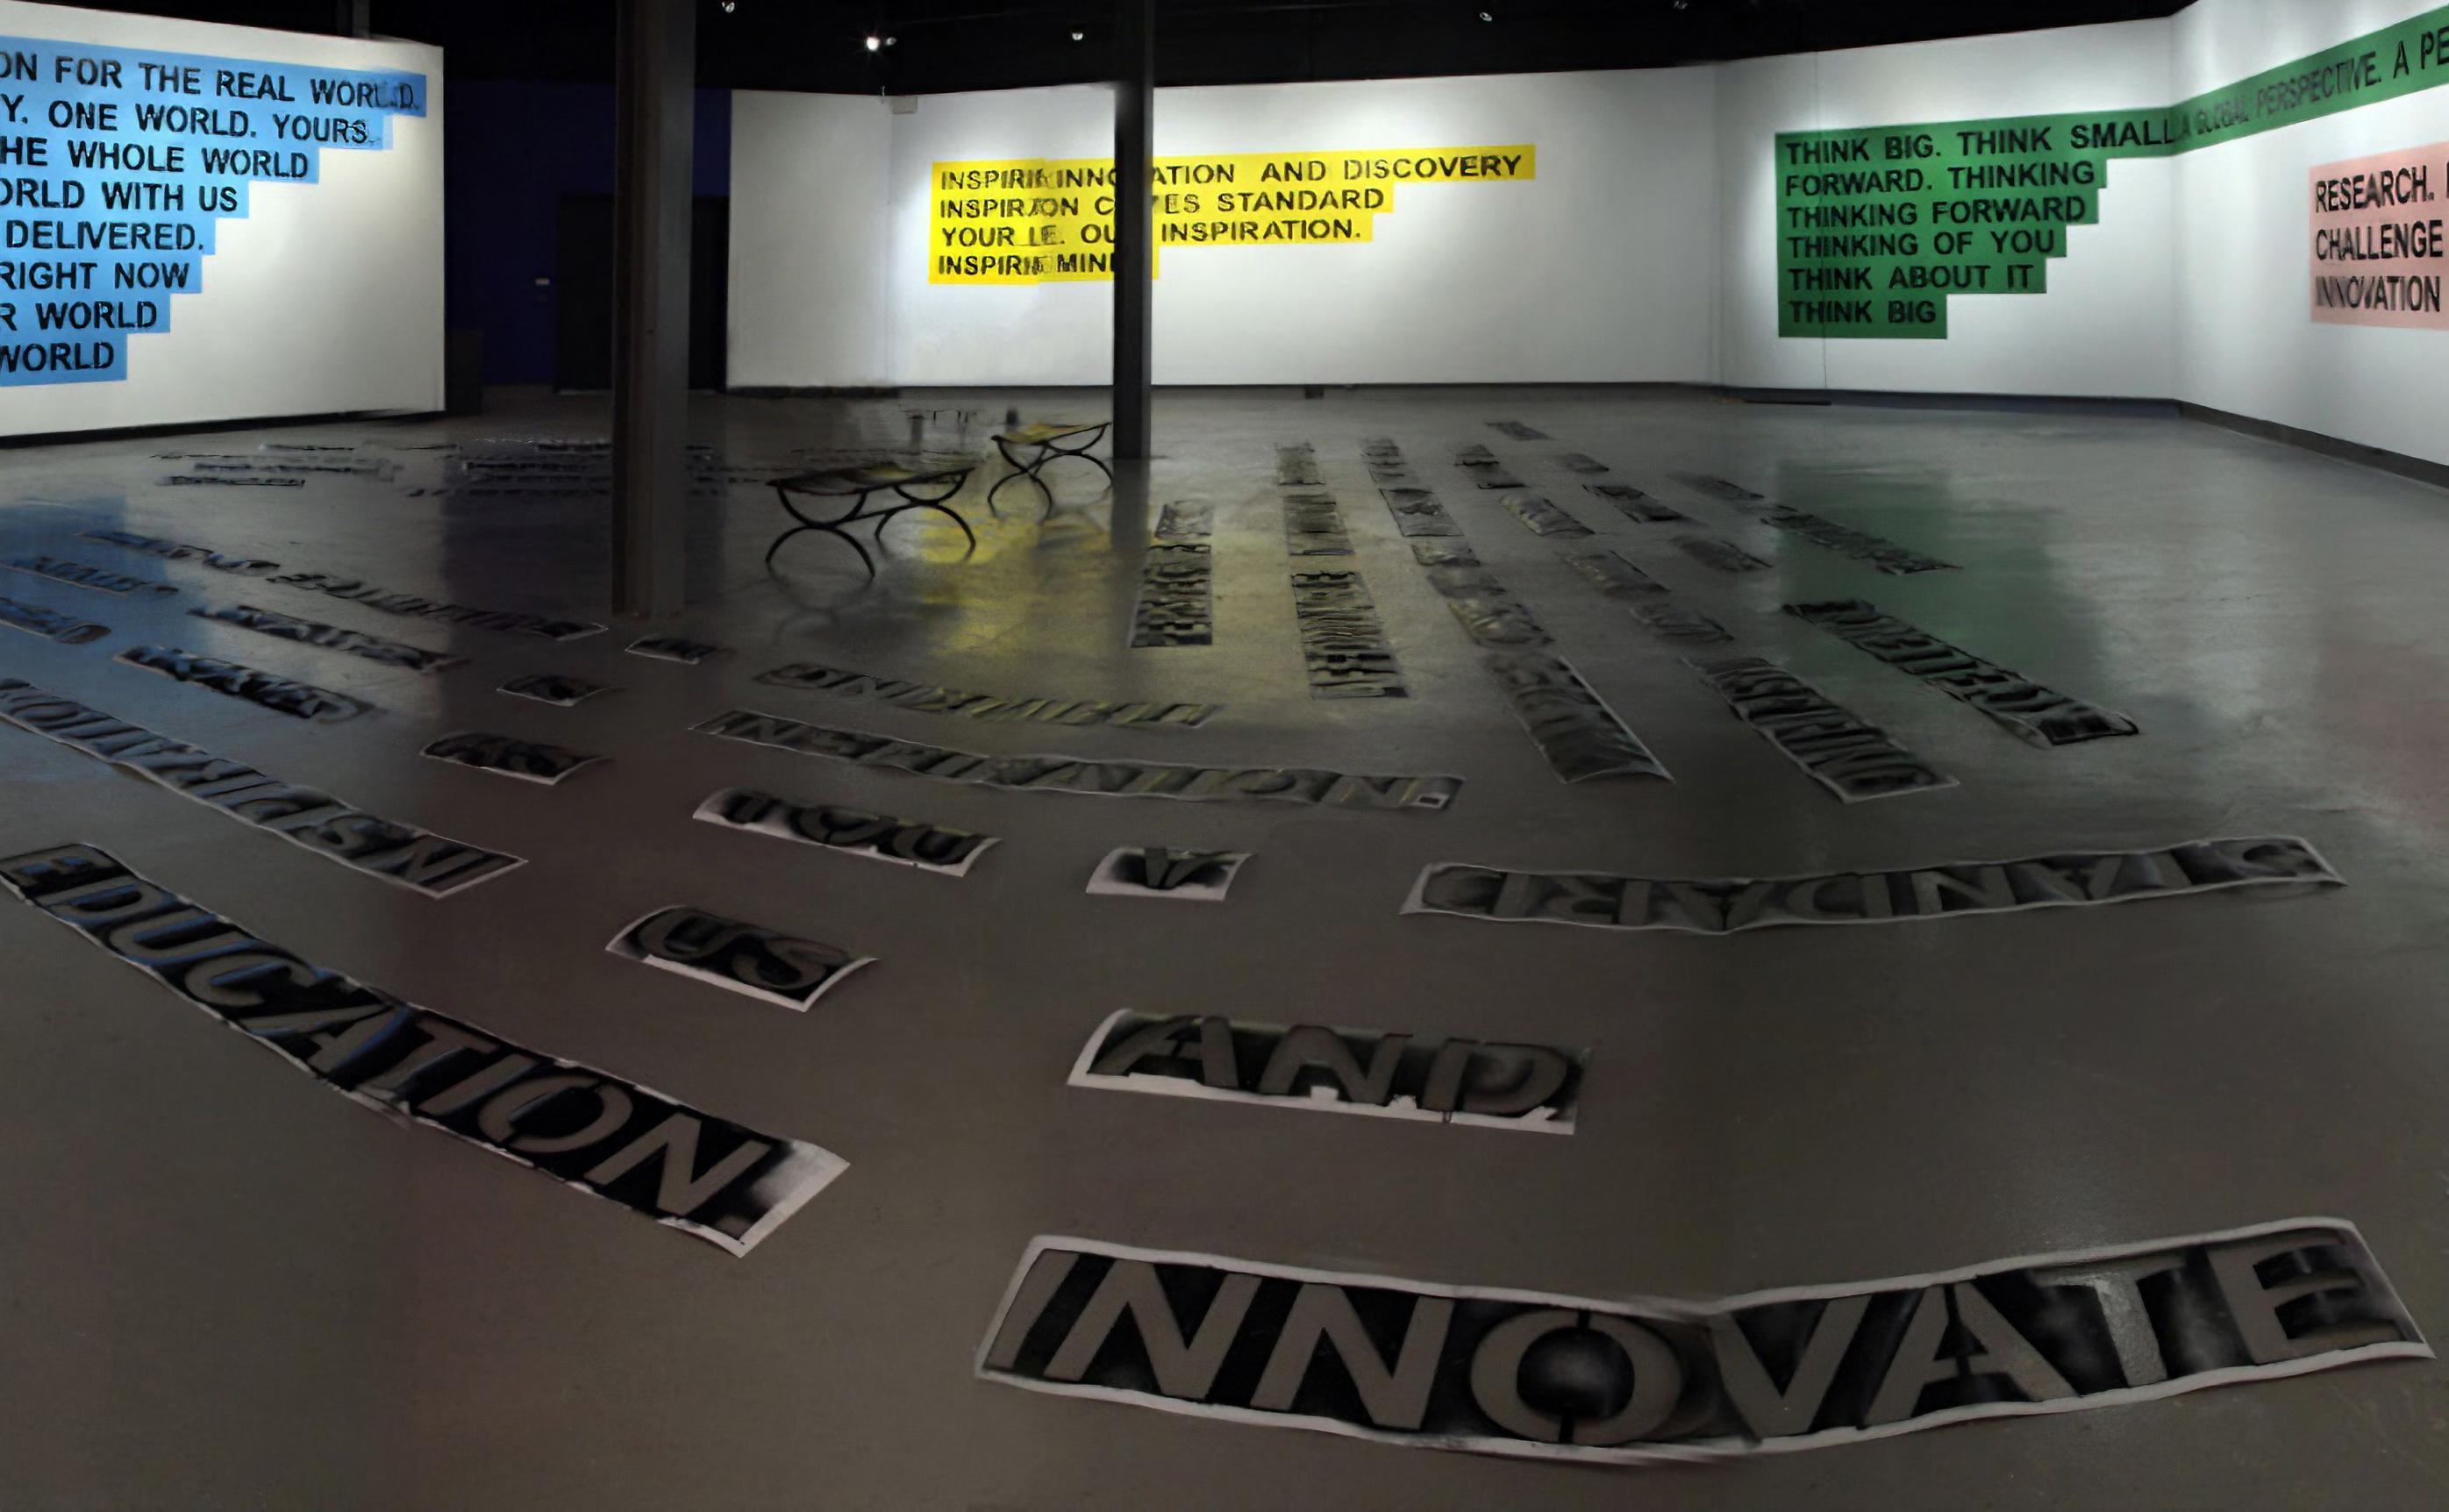 Branded, installation with wall-text paintings, left to right: "World", "Inspiration", "Think", "Innovation", Render, Univeristy of Waterloo Art Gallery, Canada, 2008